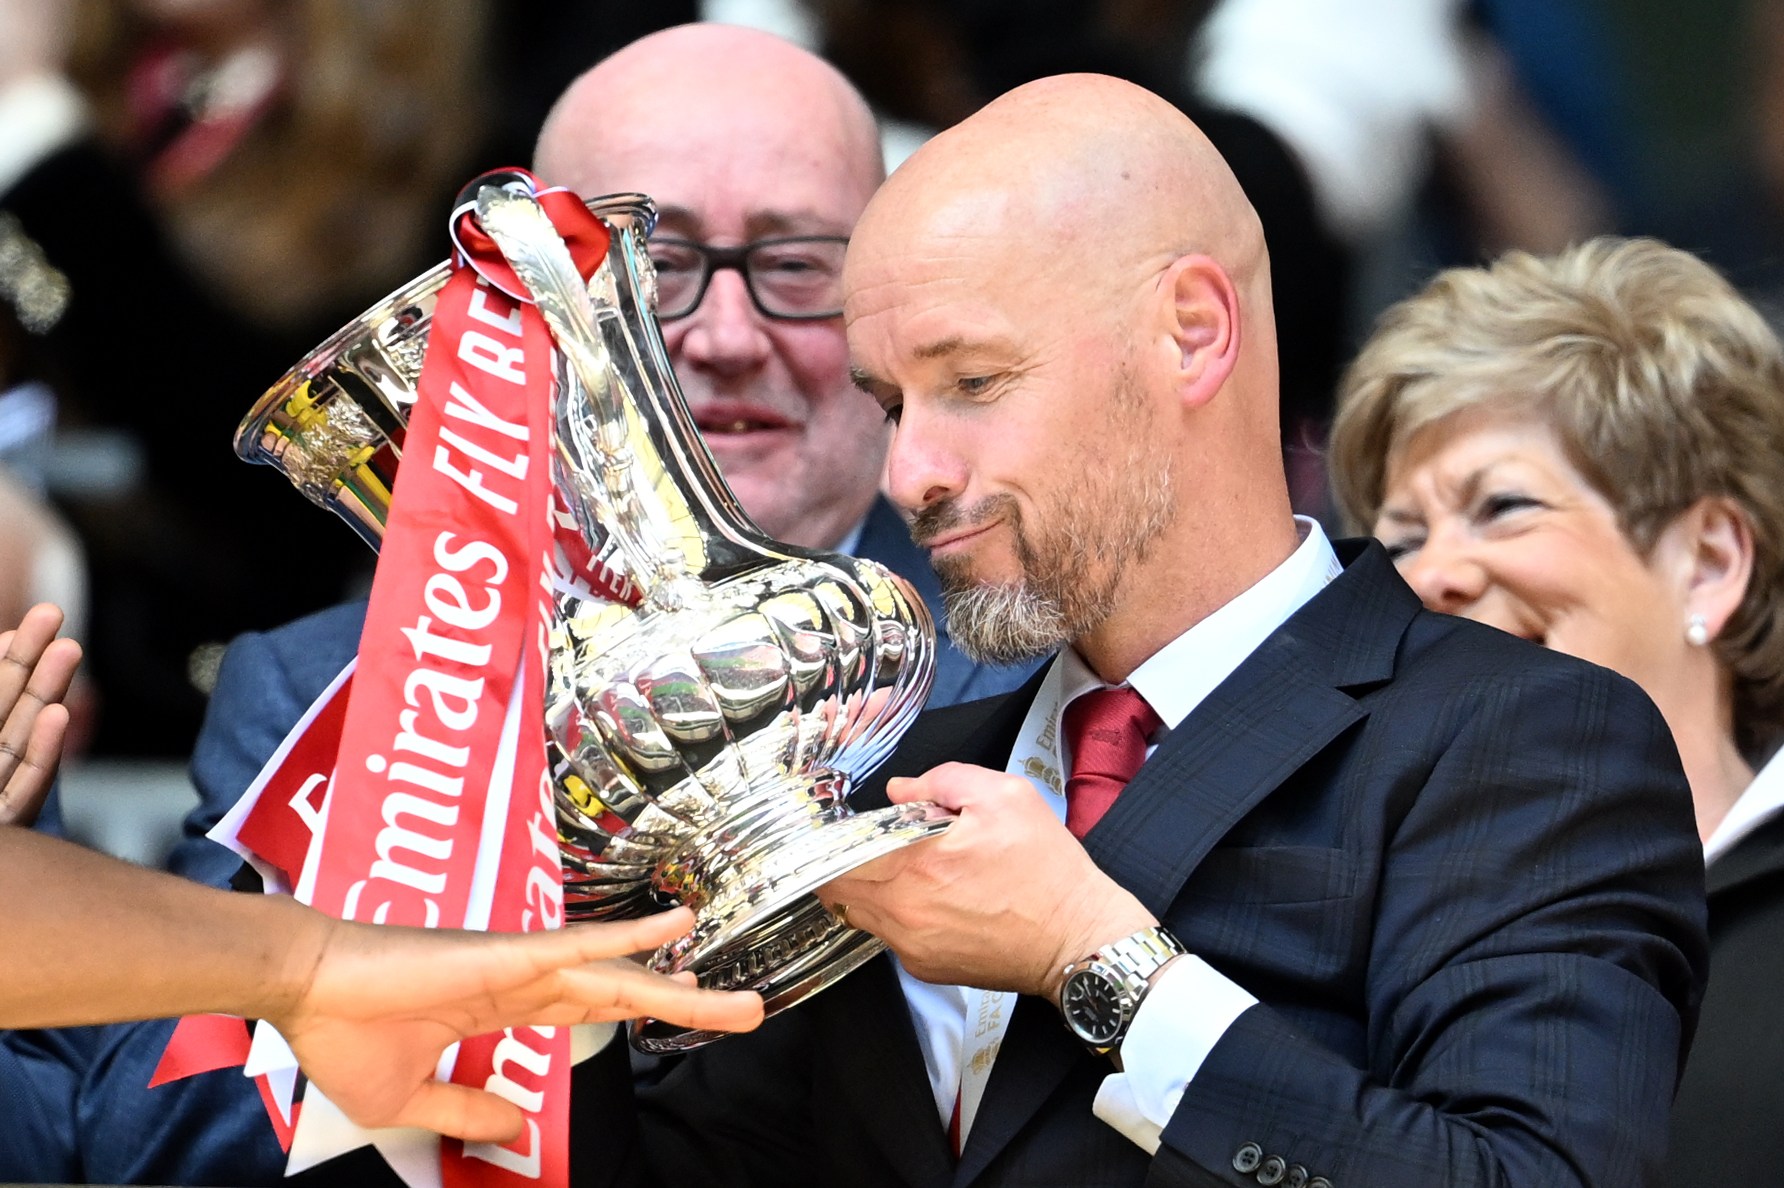 Ten Hag has won his second trophy in as many seasons at United, but there is still uncertainty surrounding his future